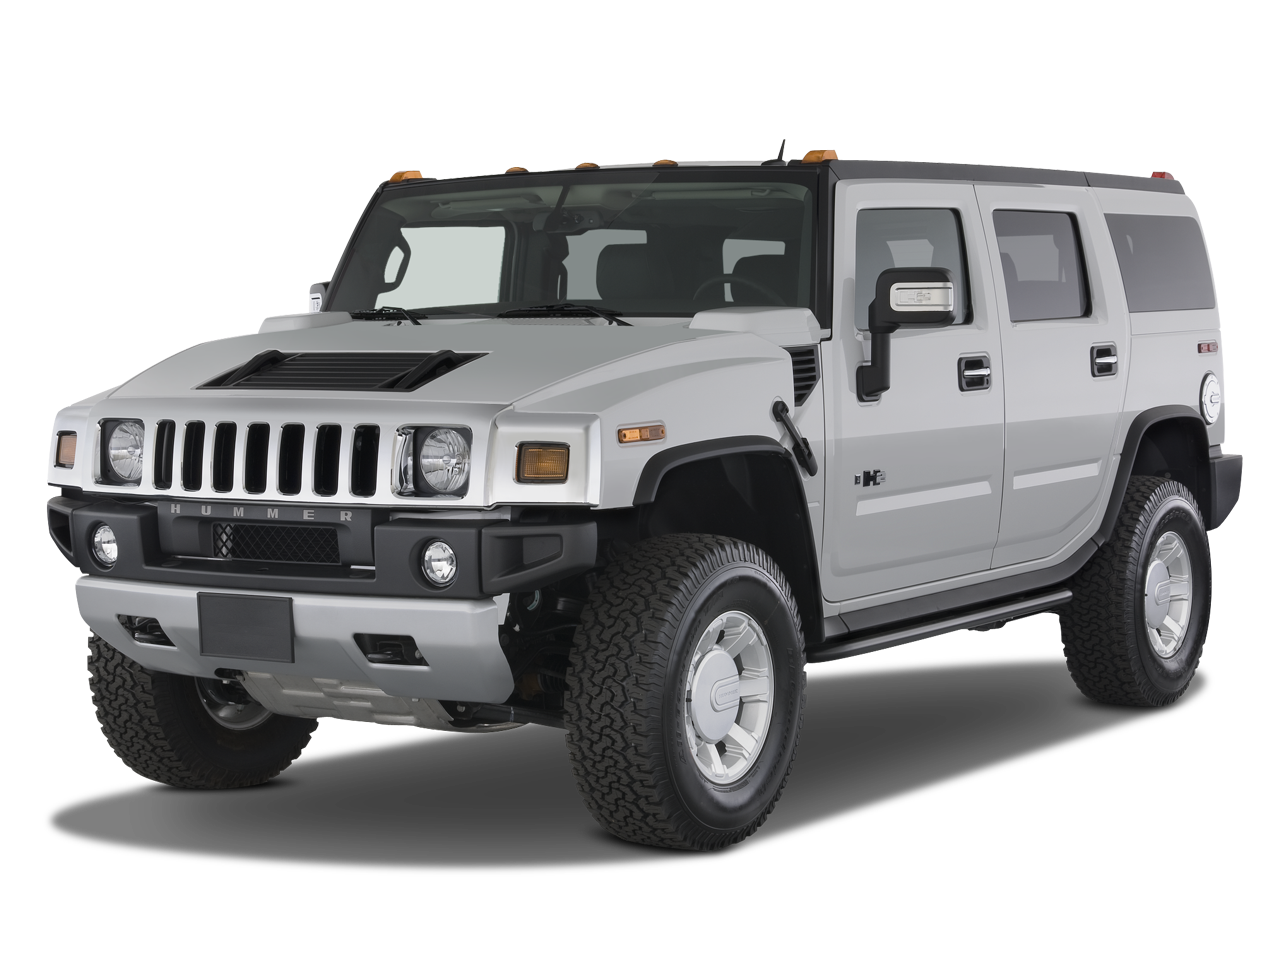 2009 Hummer H2 Prices, Reviews, and Photos - MotorTrend